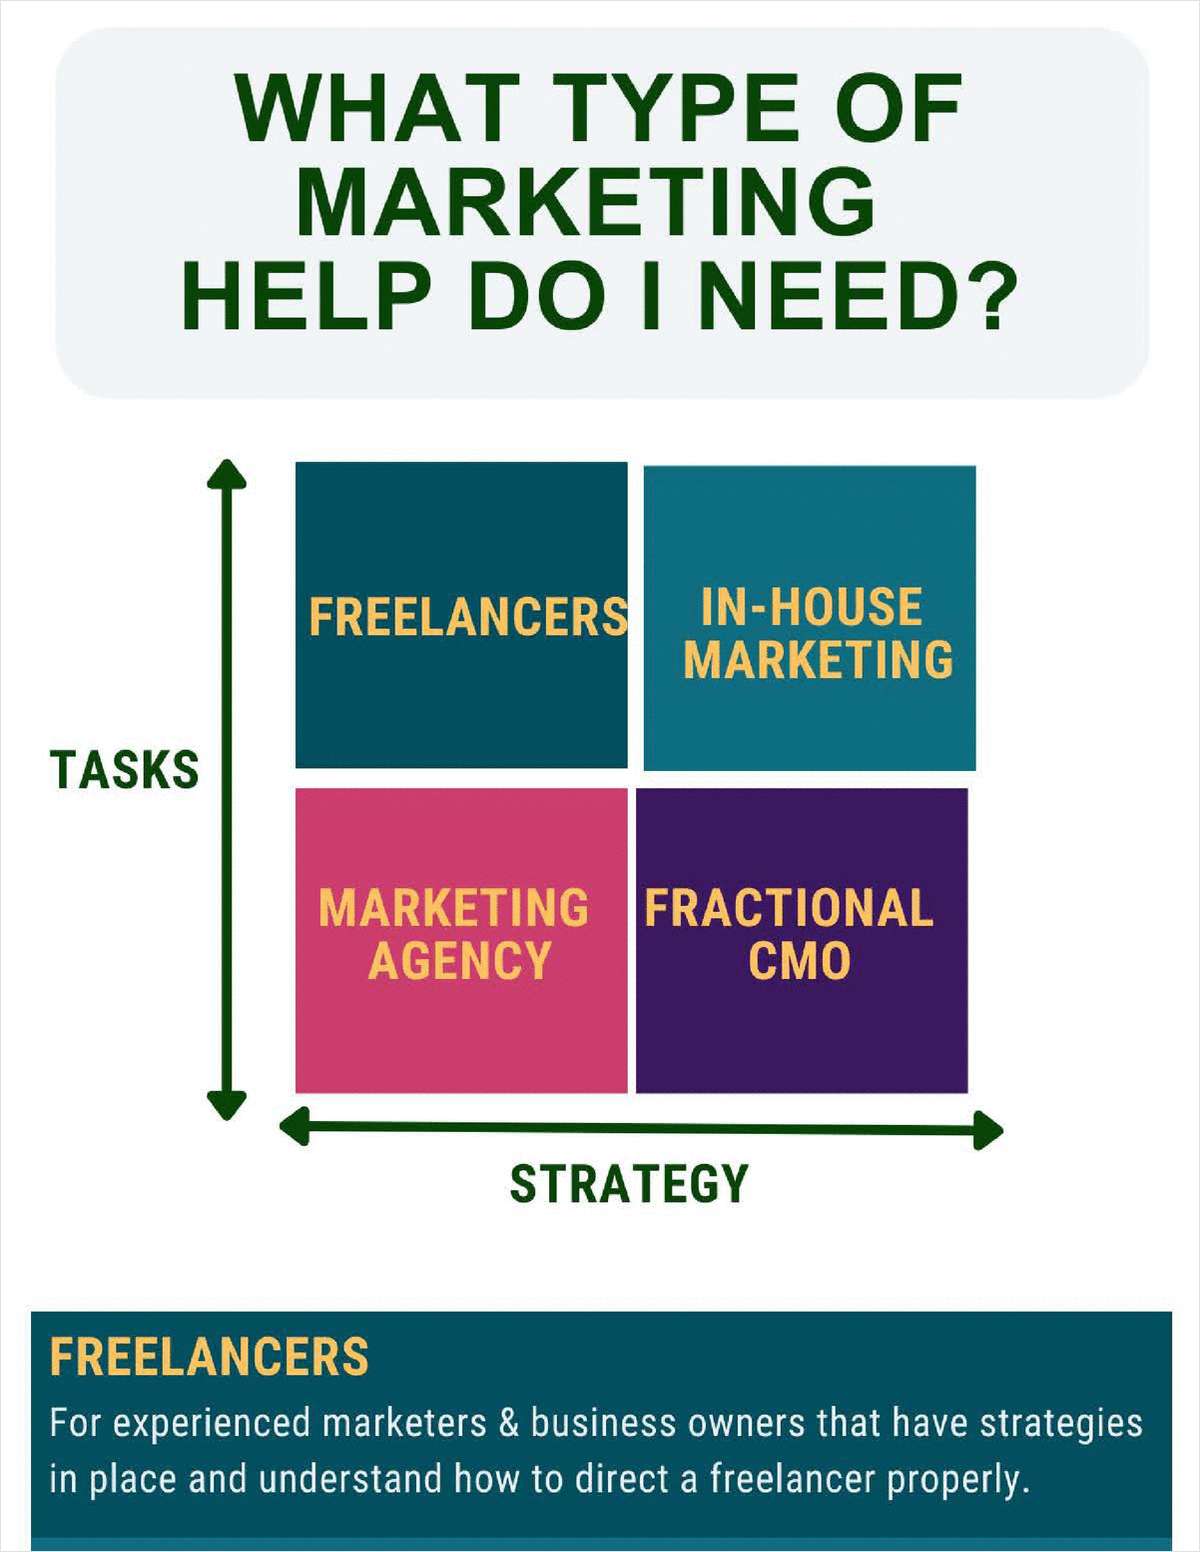 Types of Marketing Help Infographic